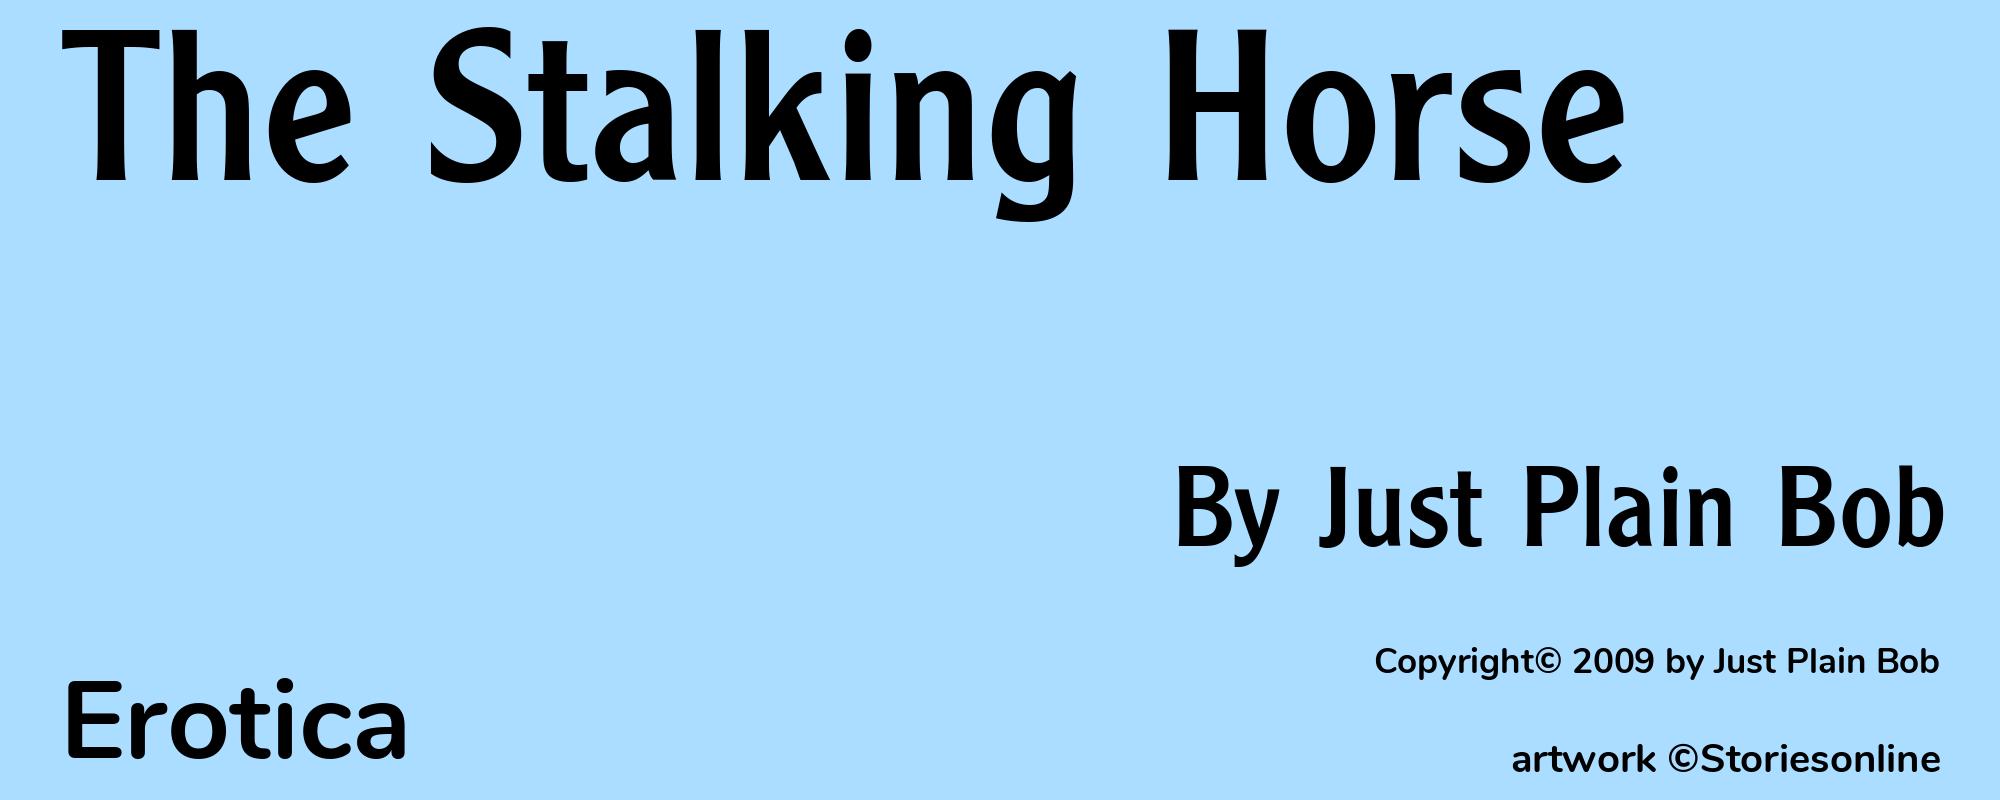 The Stalking Horse - Cover